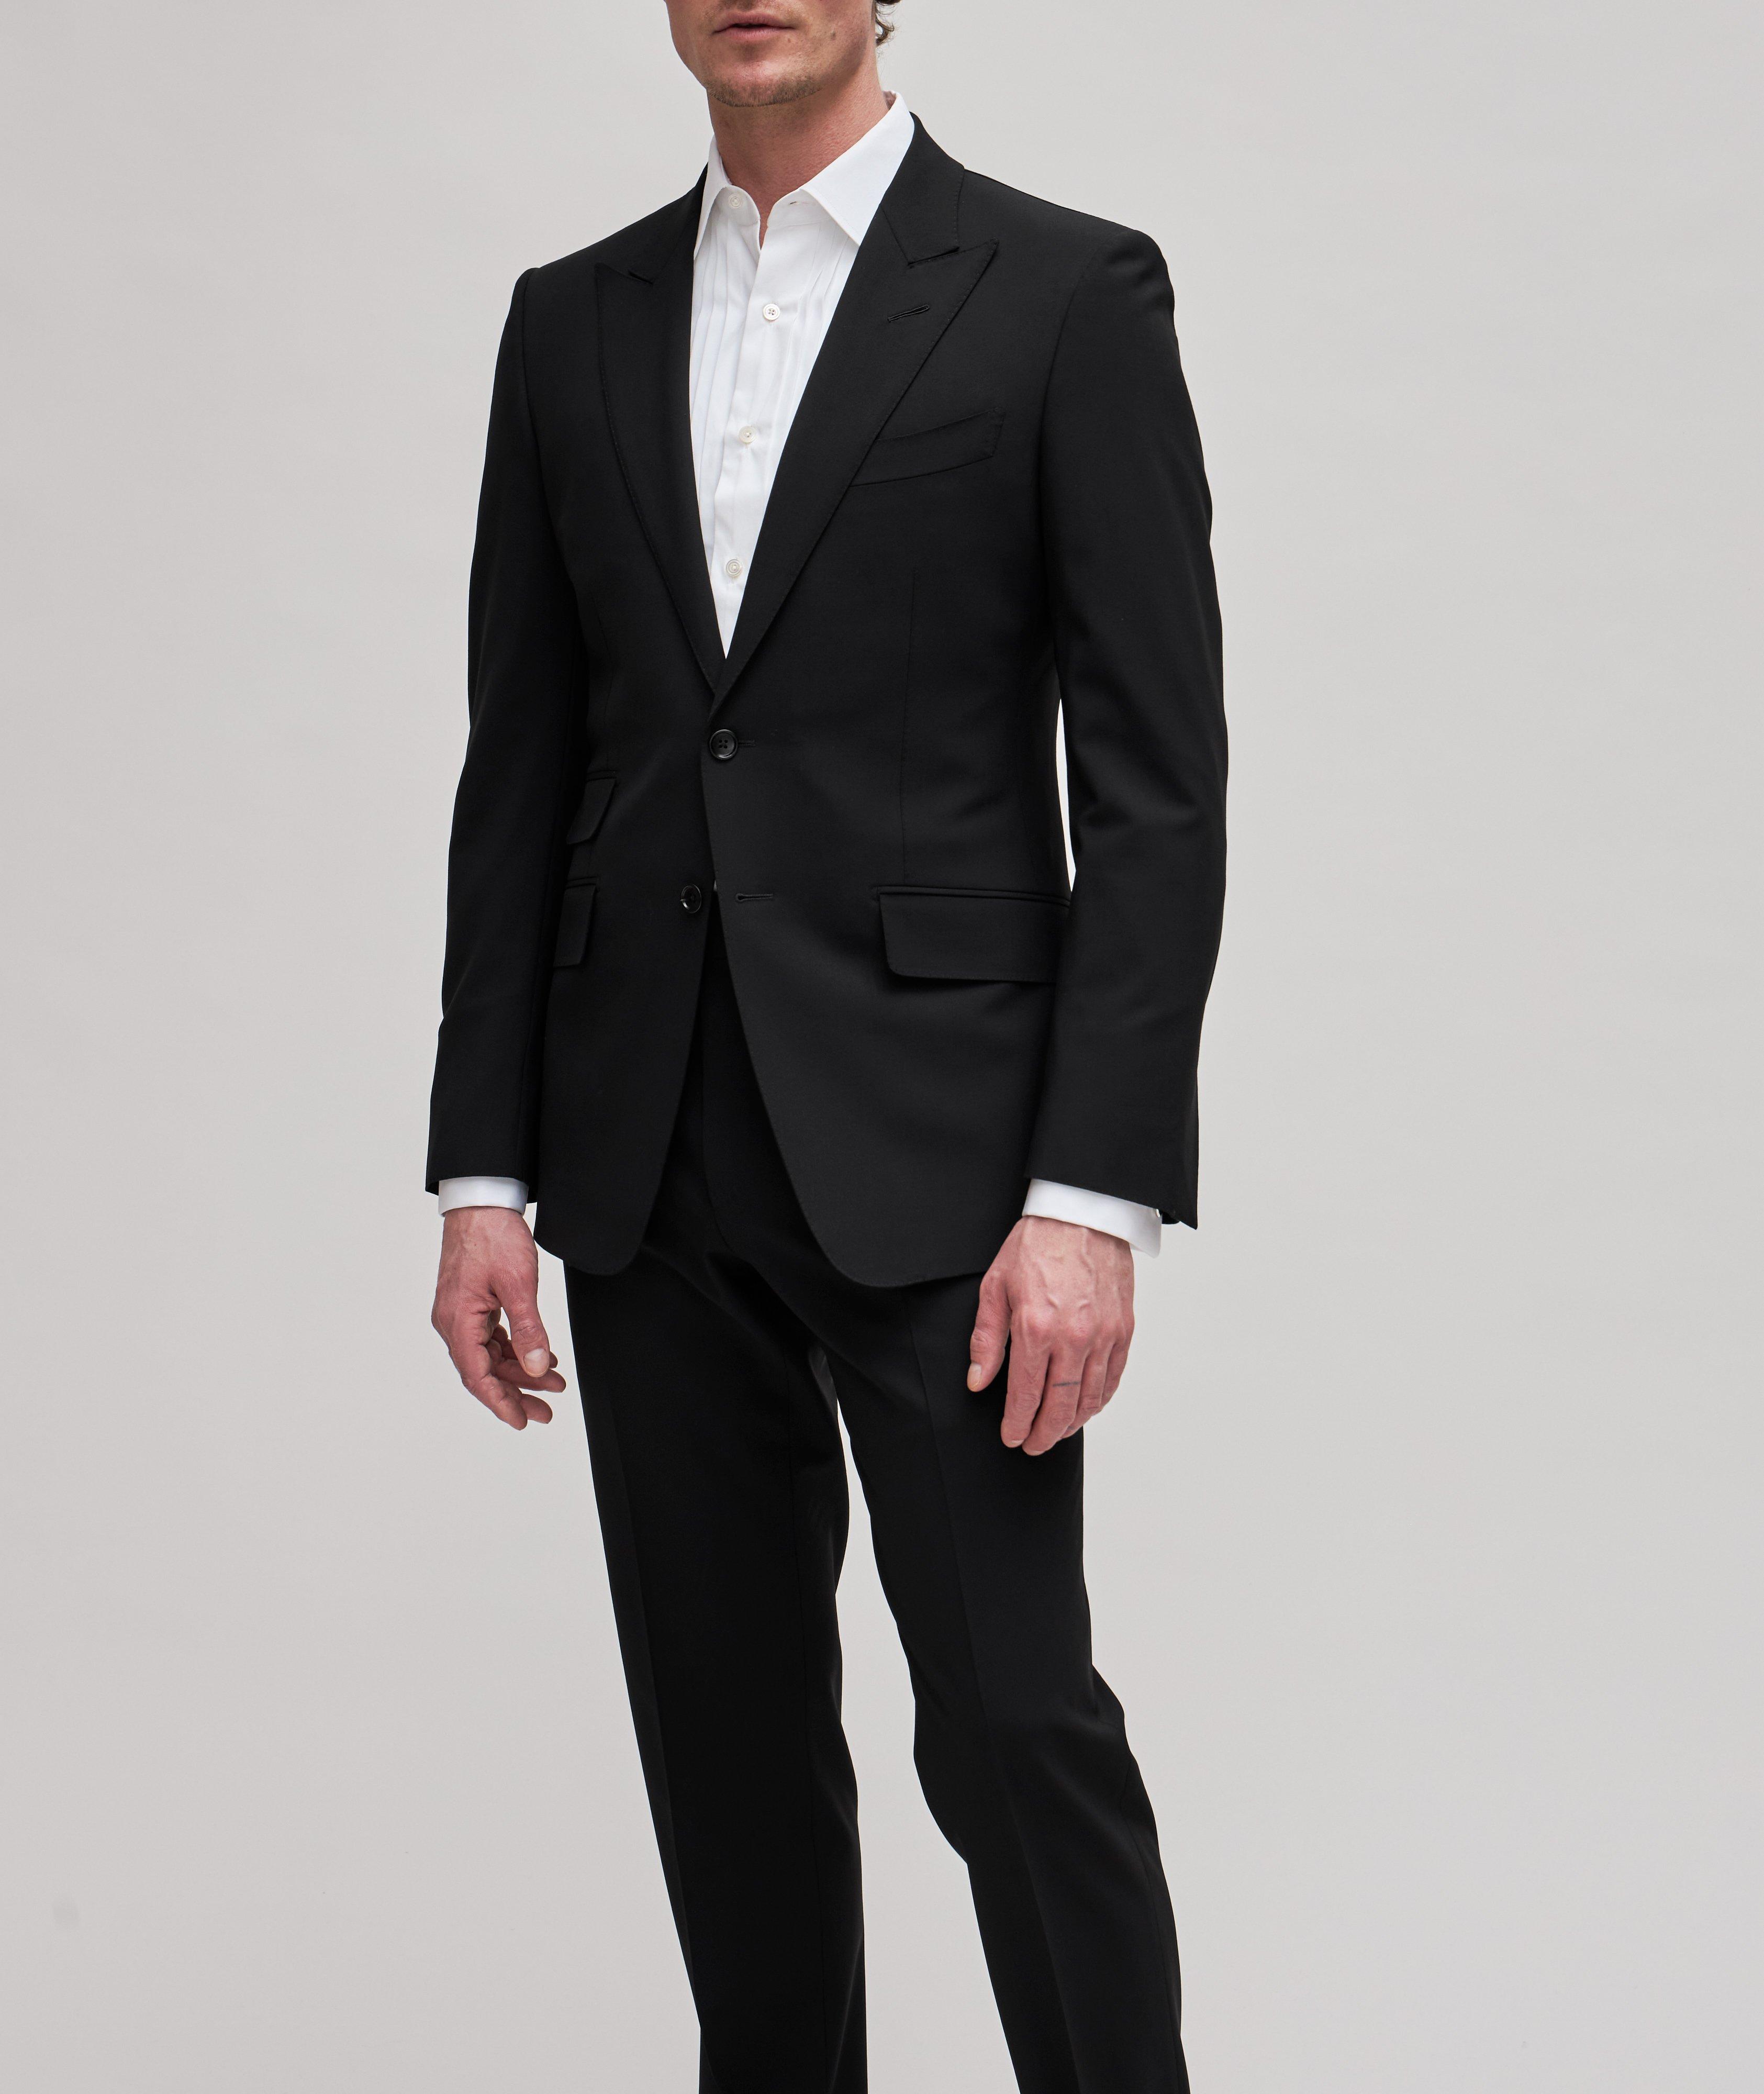 O'Connor Plain Weave Stretch-Wool Suit image 1